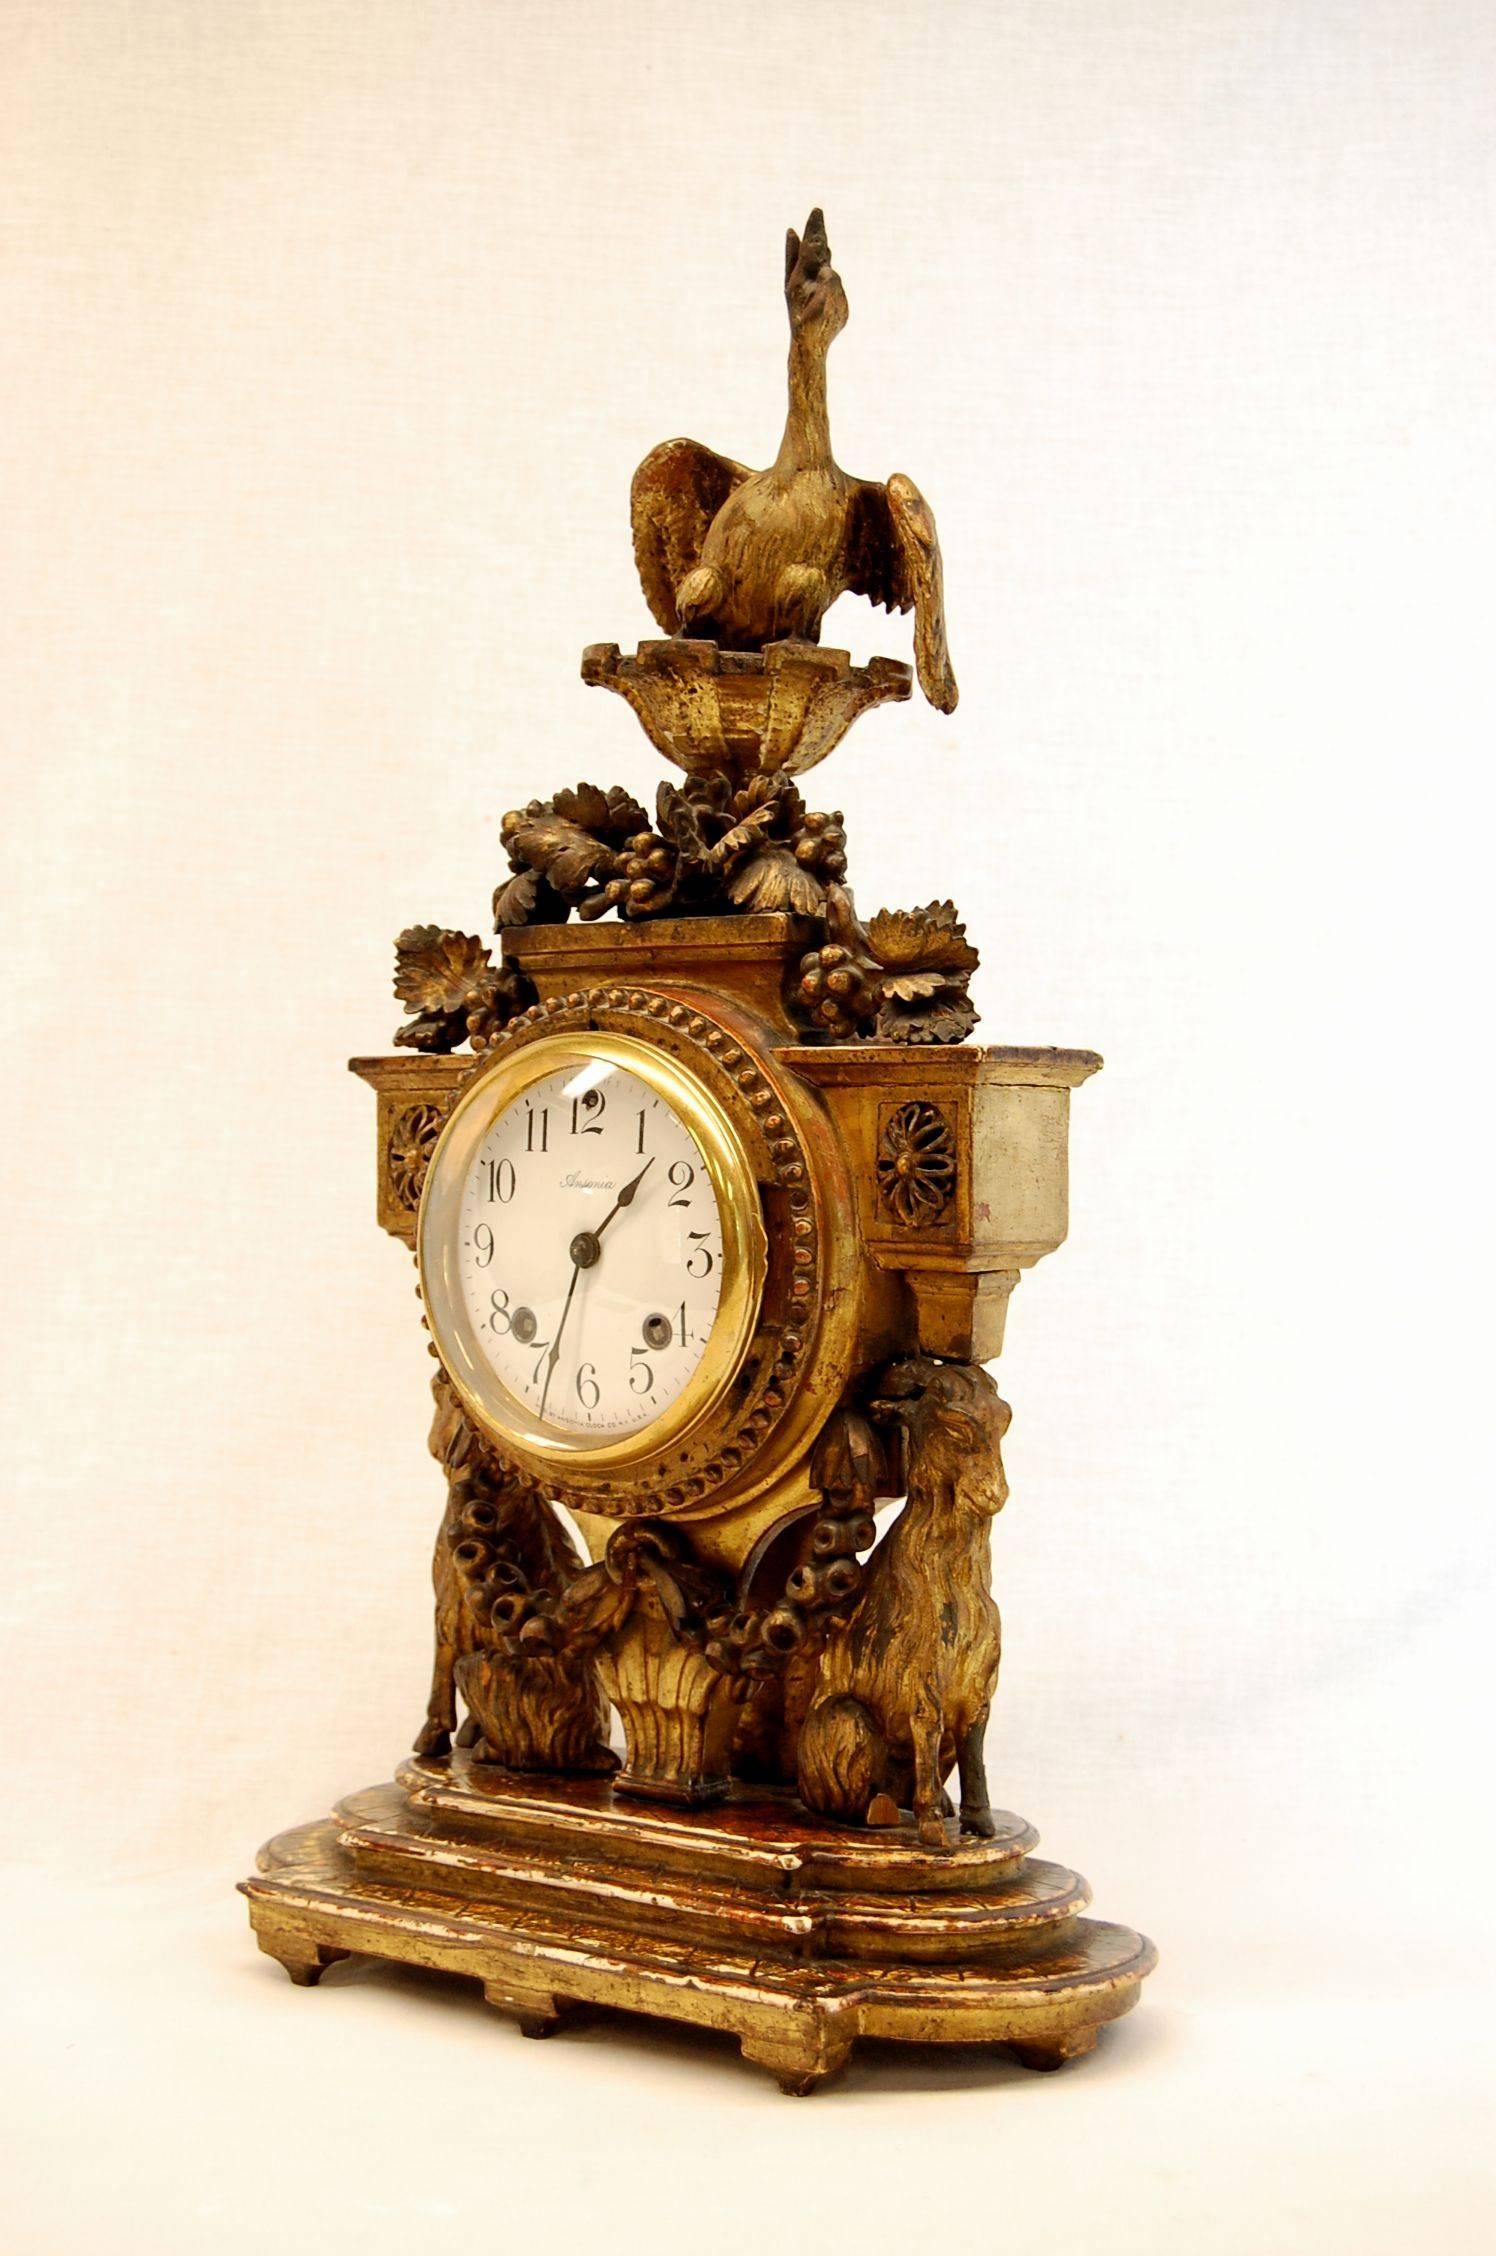 Gilded carved wooden shelf clock with bird finial and ram figure supports with Ansonia works (may have been added later).